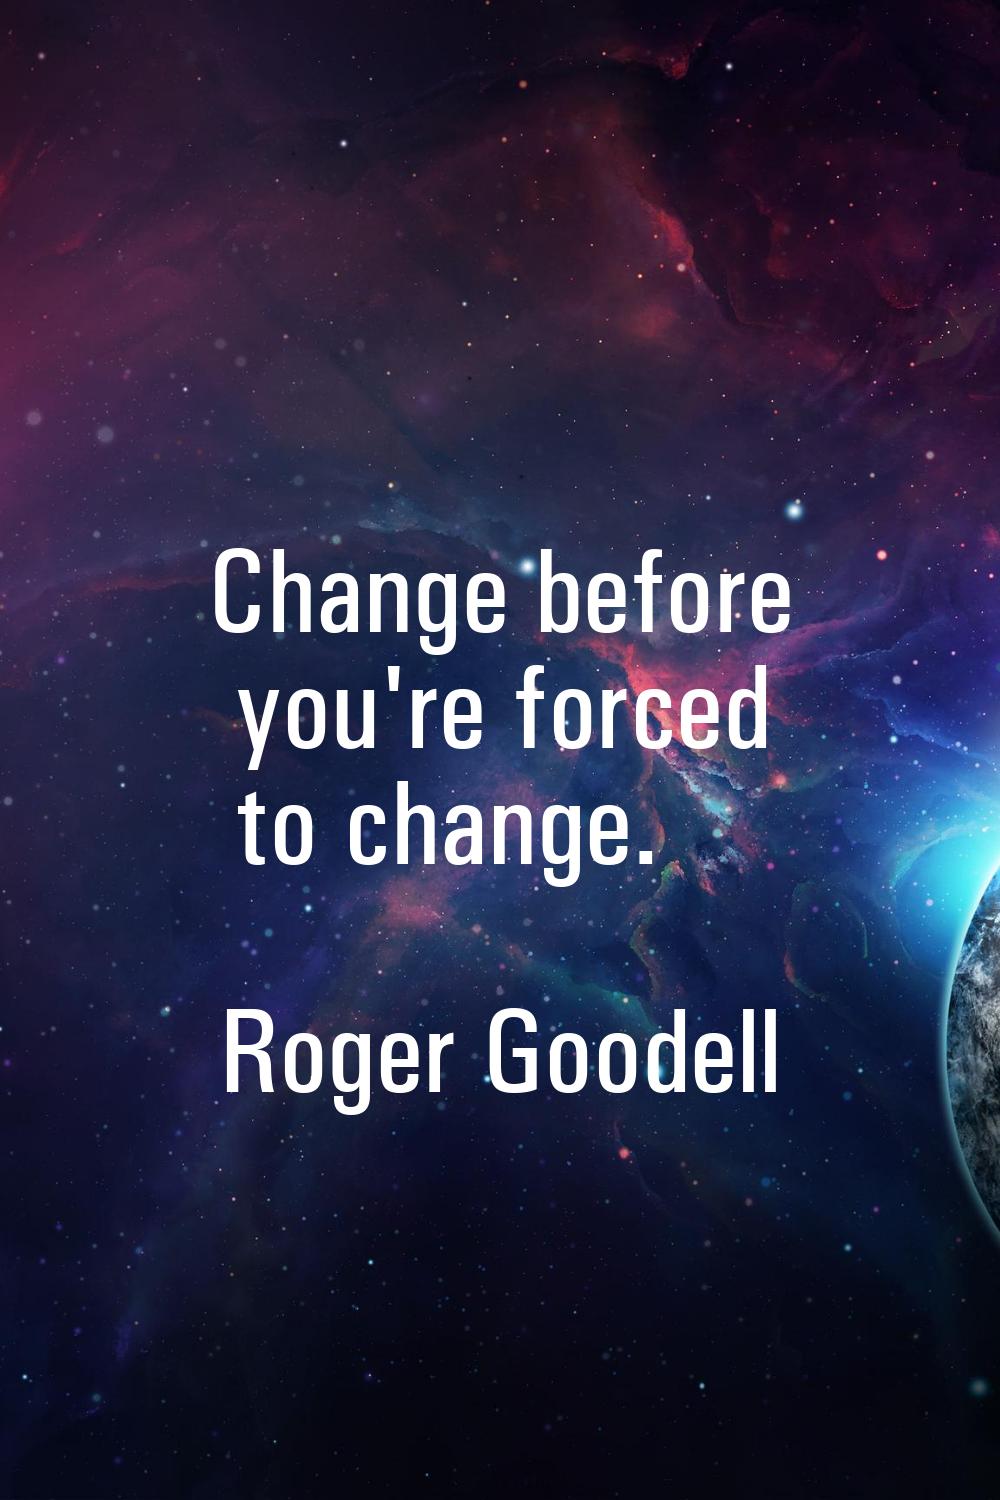 Change before you're forced to change.